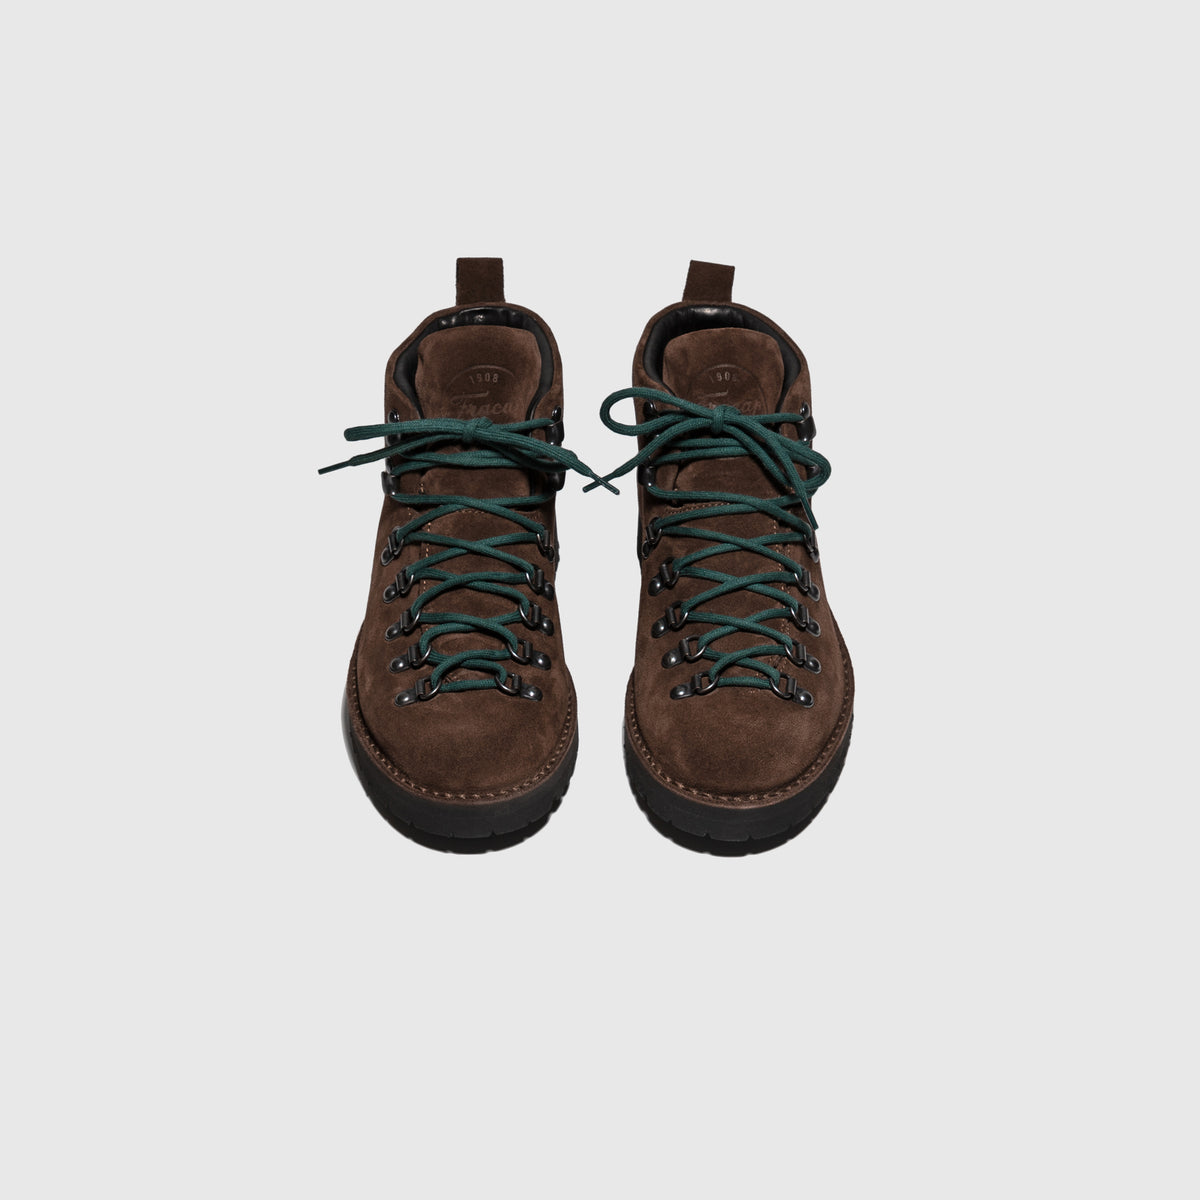 M120 BOOTS 